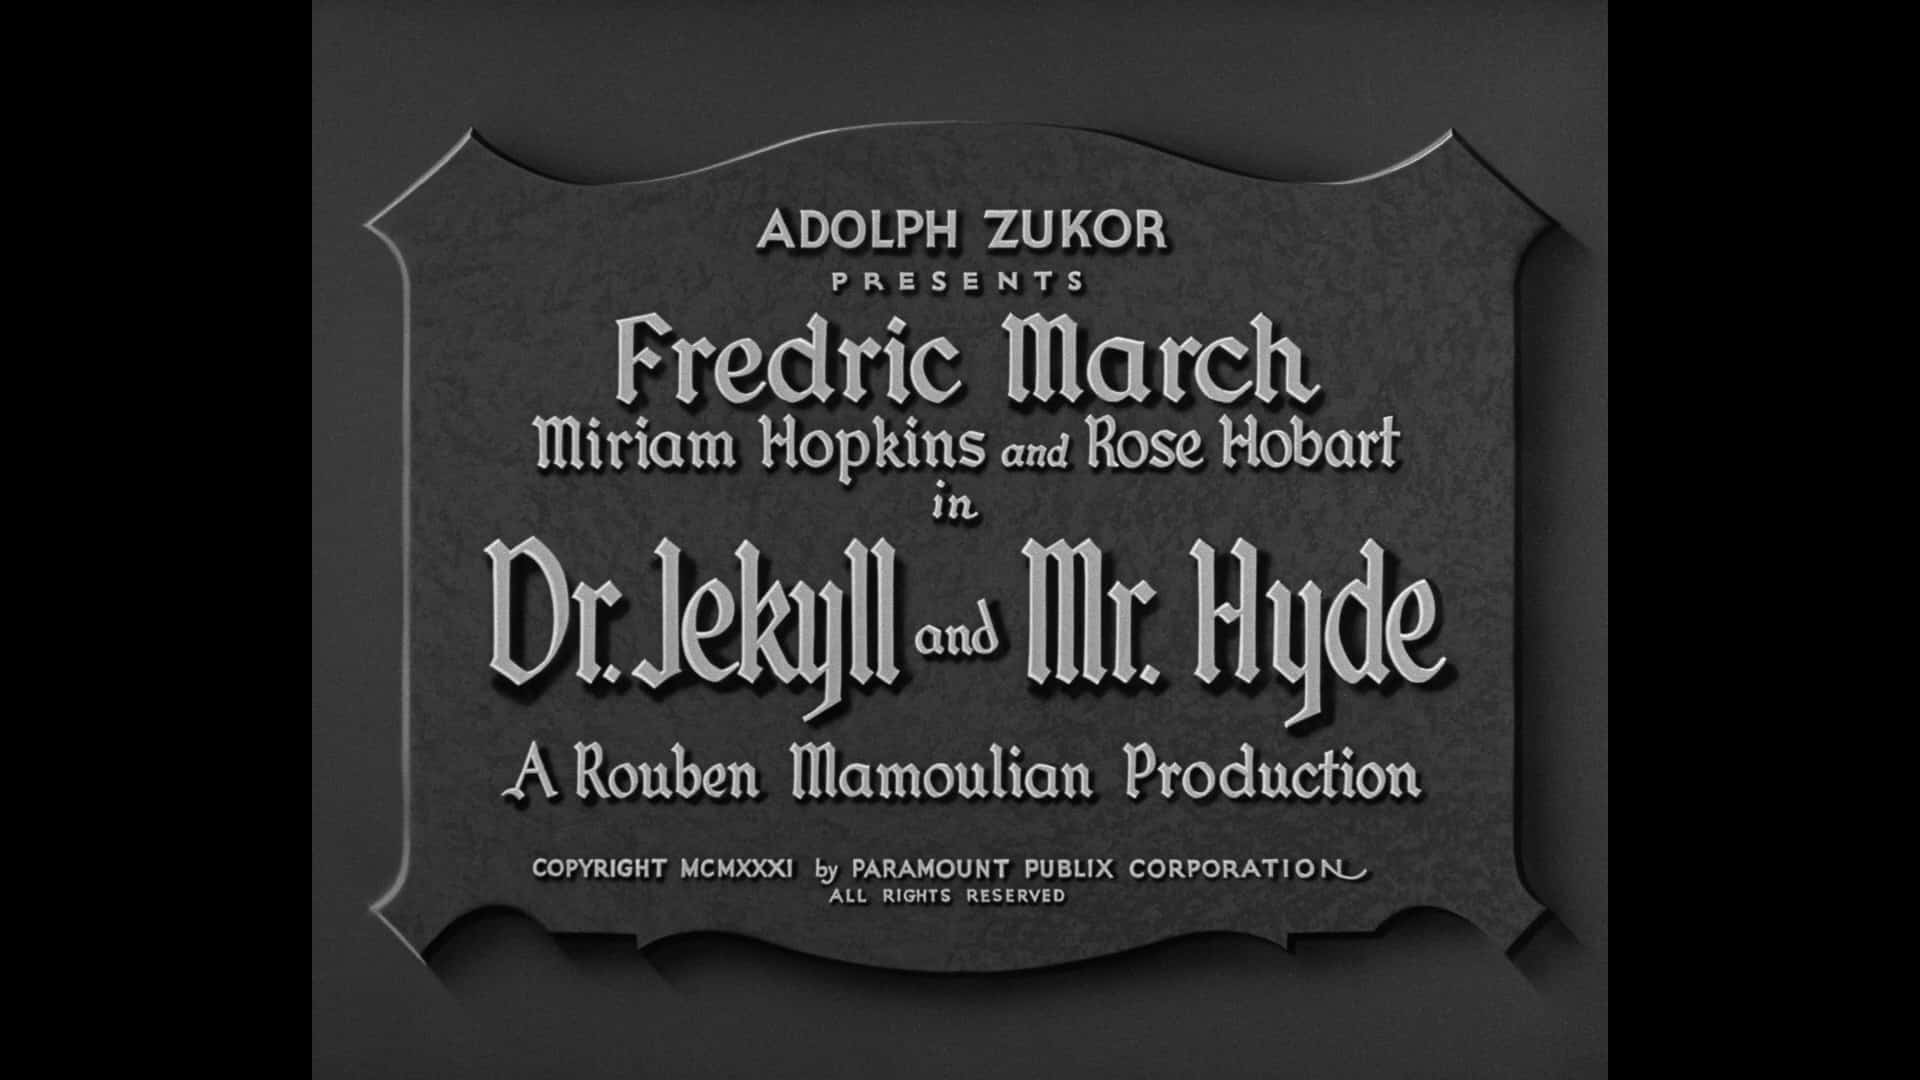 Dr. Jekyll and Mr. Hyde 1932 Warner Archive Blu-ray_43